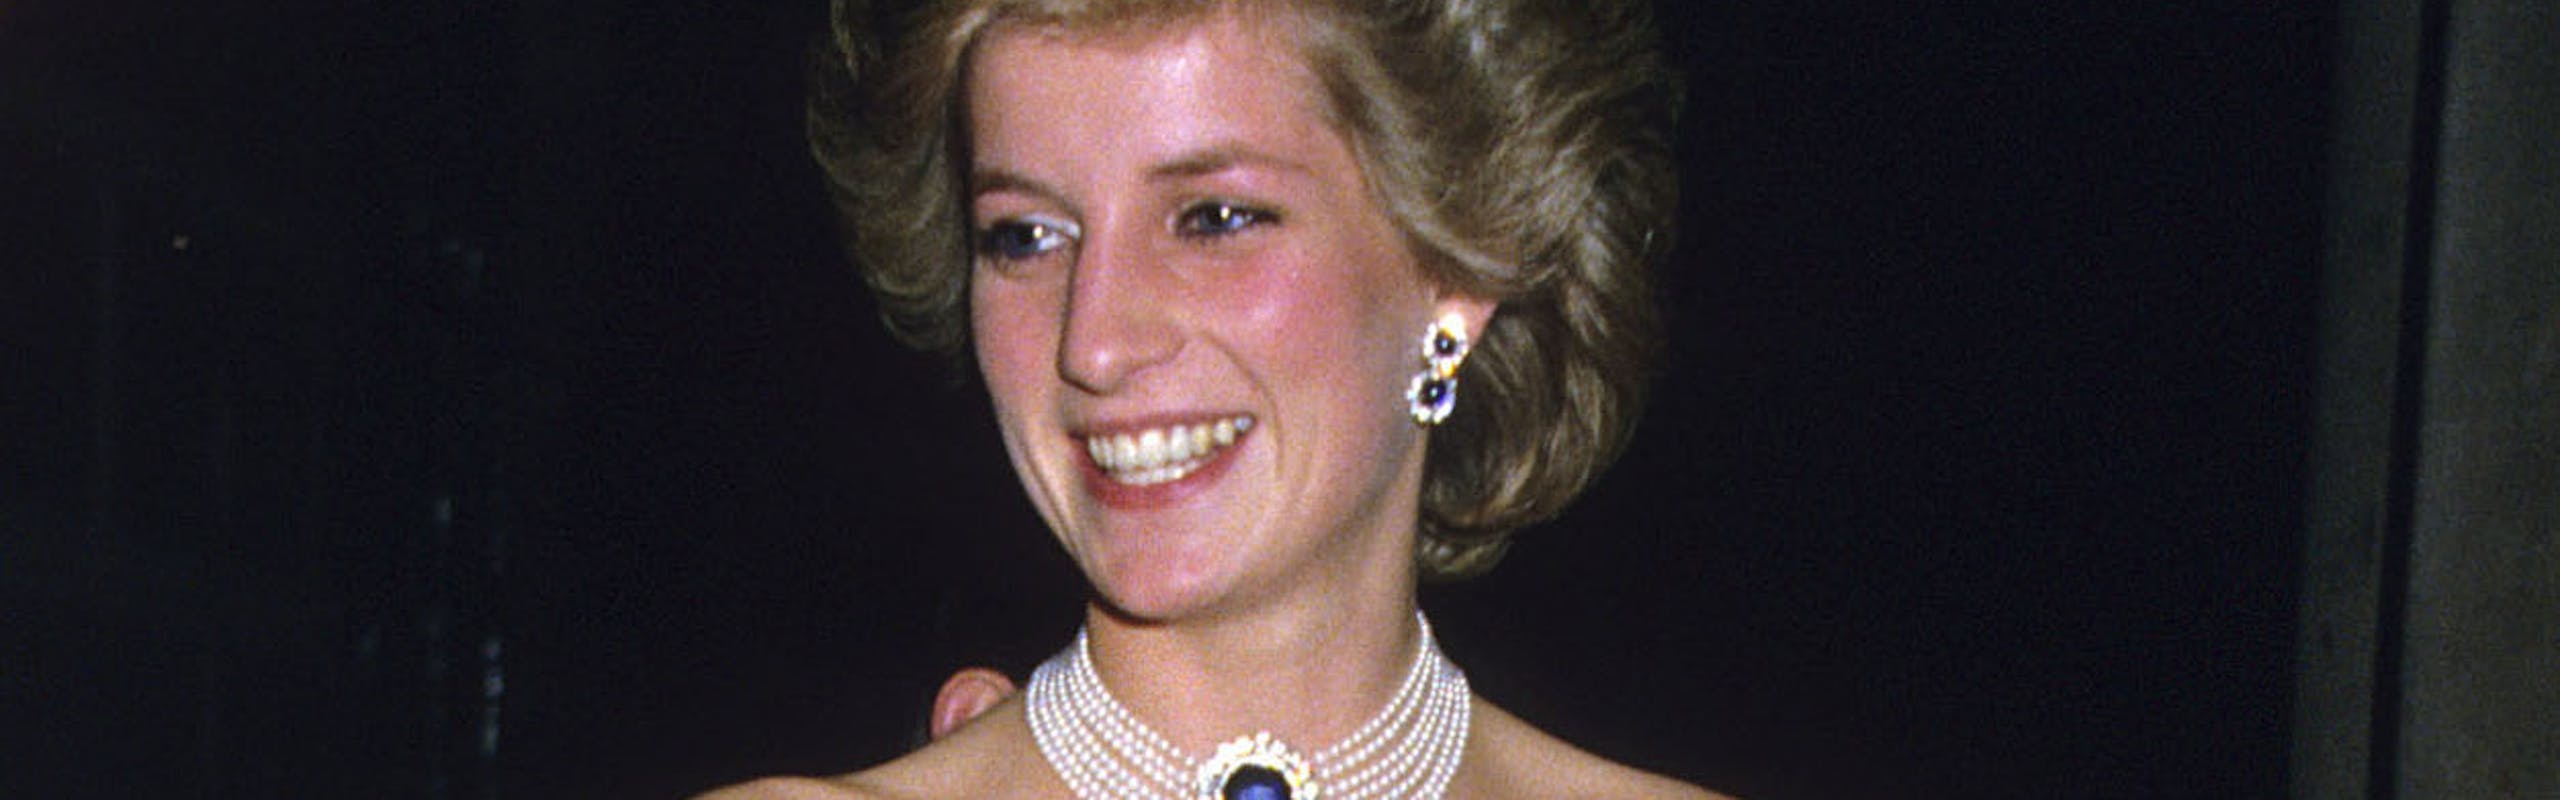 princess diana in black and white gown to be auctioned at sothebys fashion icons sale